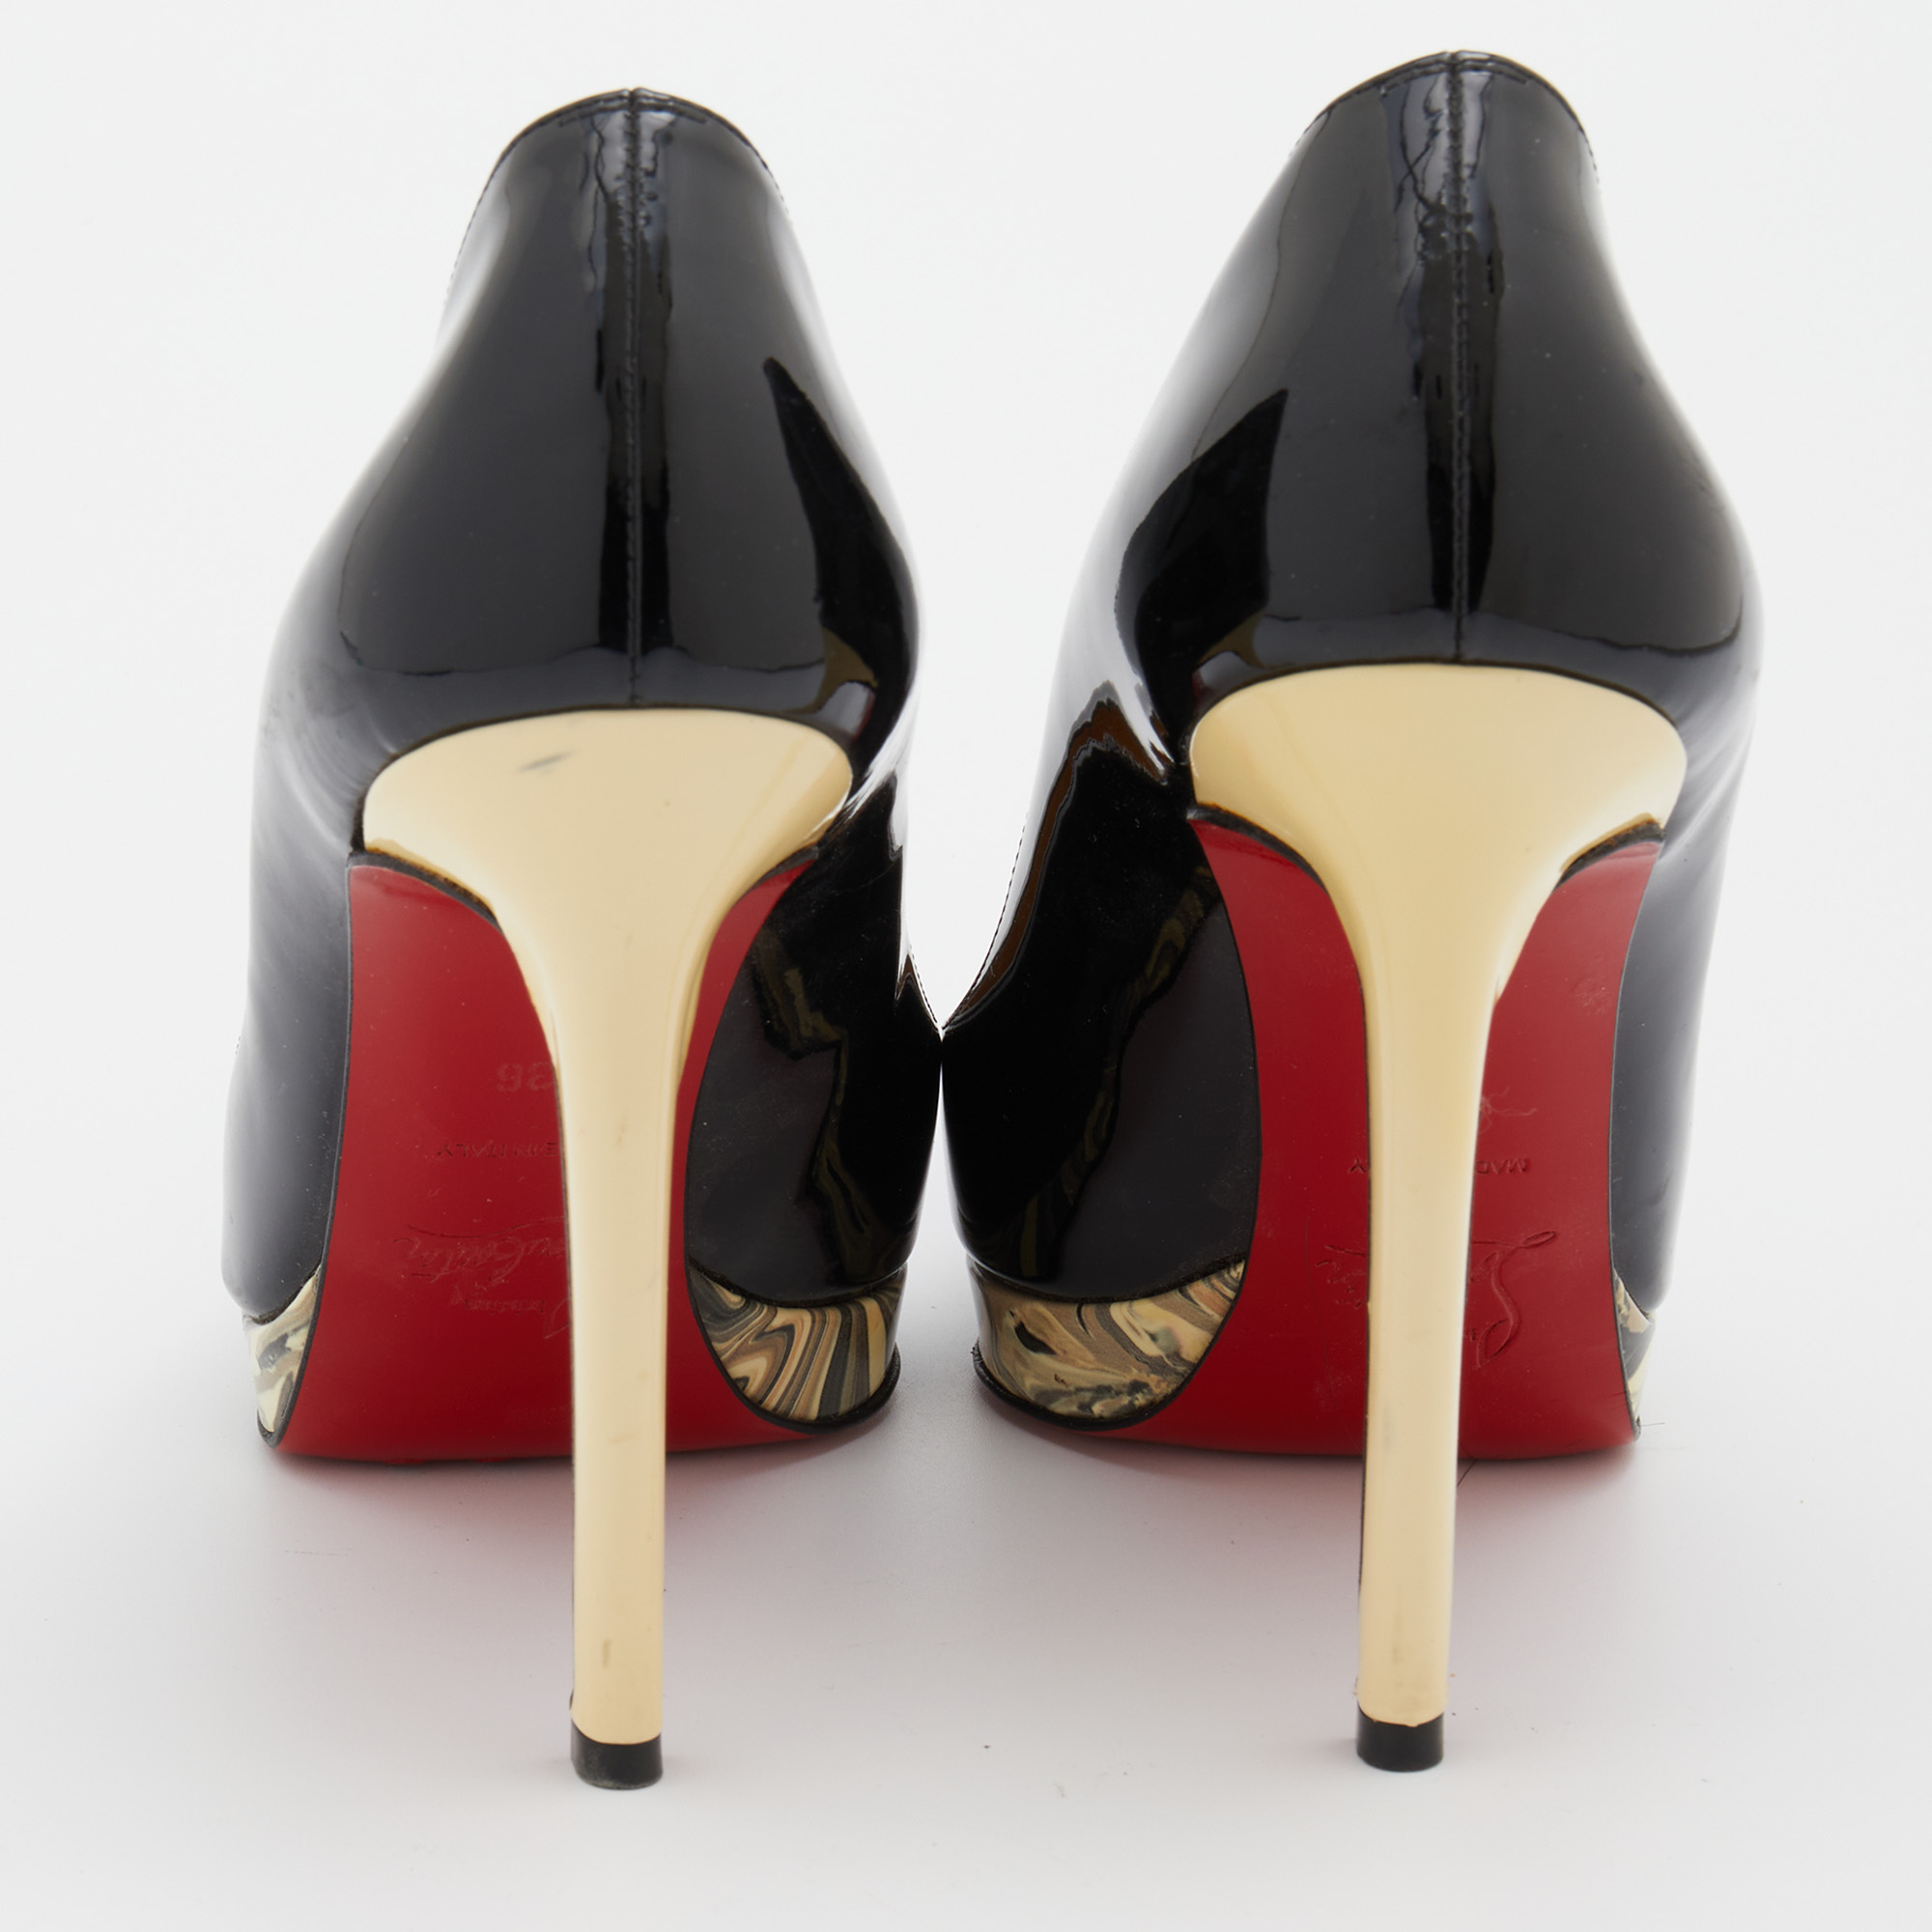 Christian Louboutin Black Patent Leather Pointed Toe Pumps Size 36